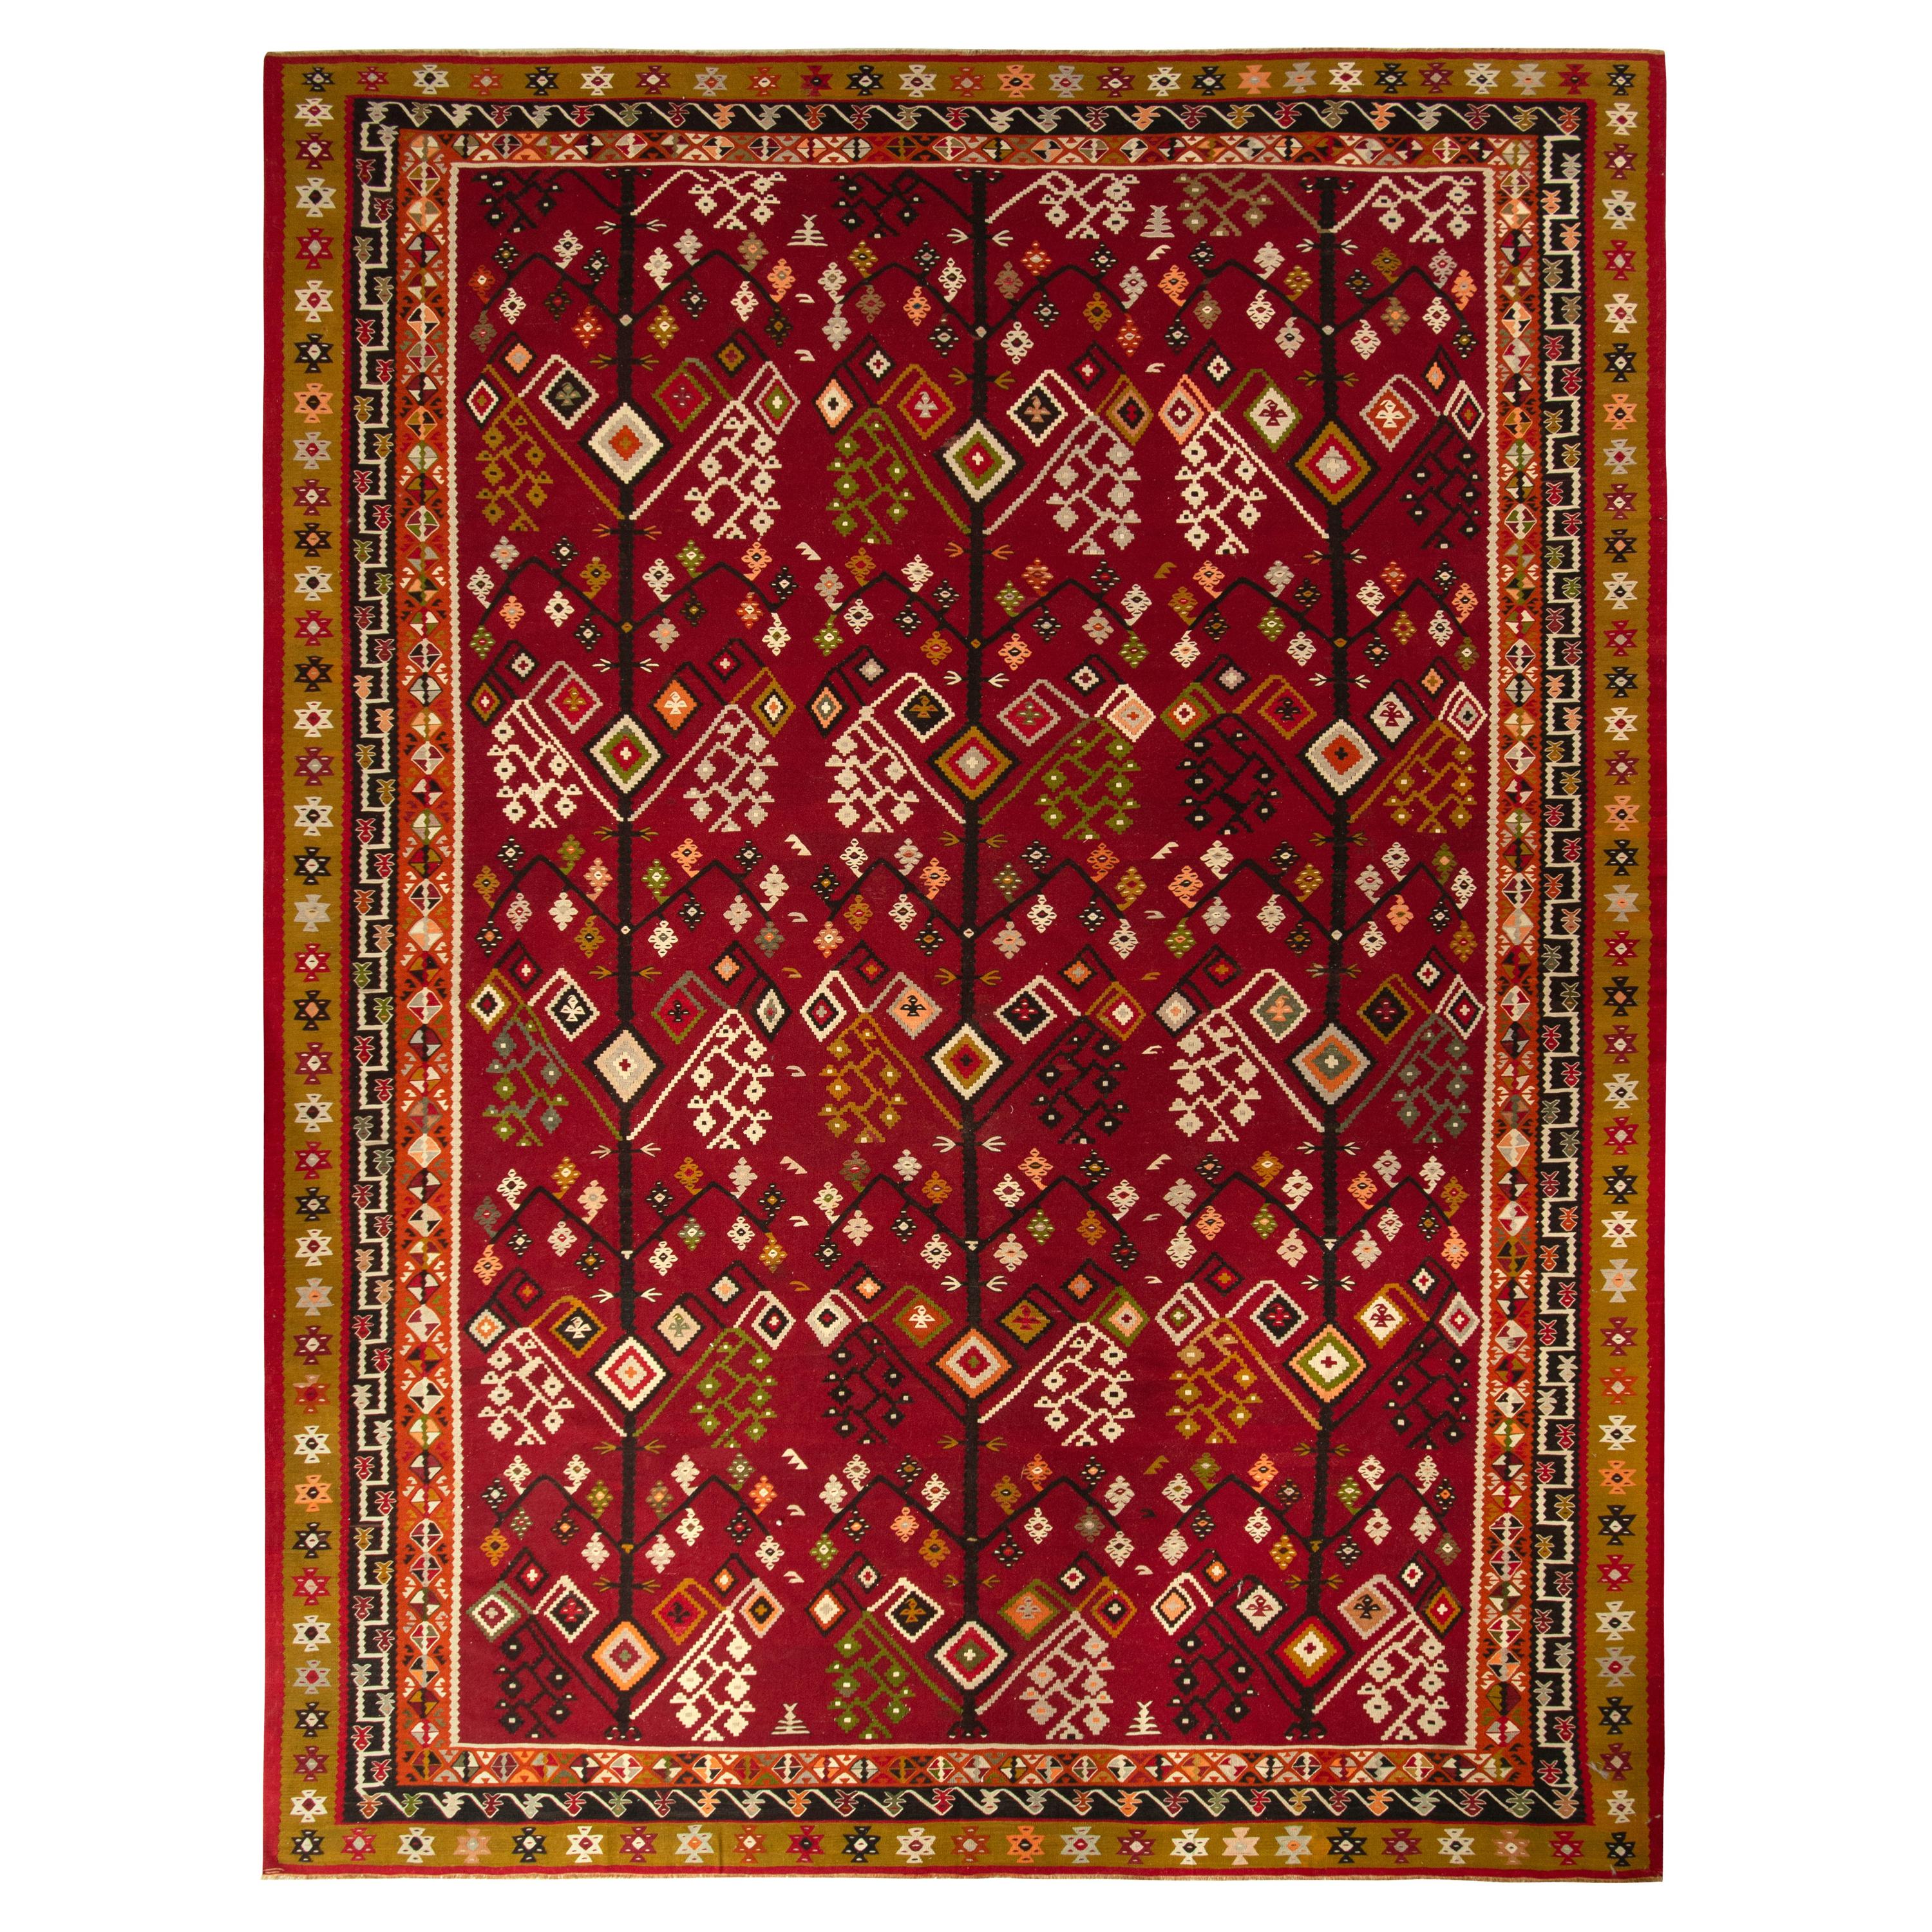 Handwoven Vintage Kilim Rug in Red and Gold Geometric Pattern by Rug & Kilim For Sale